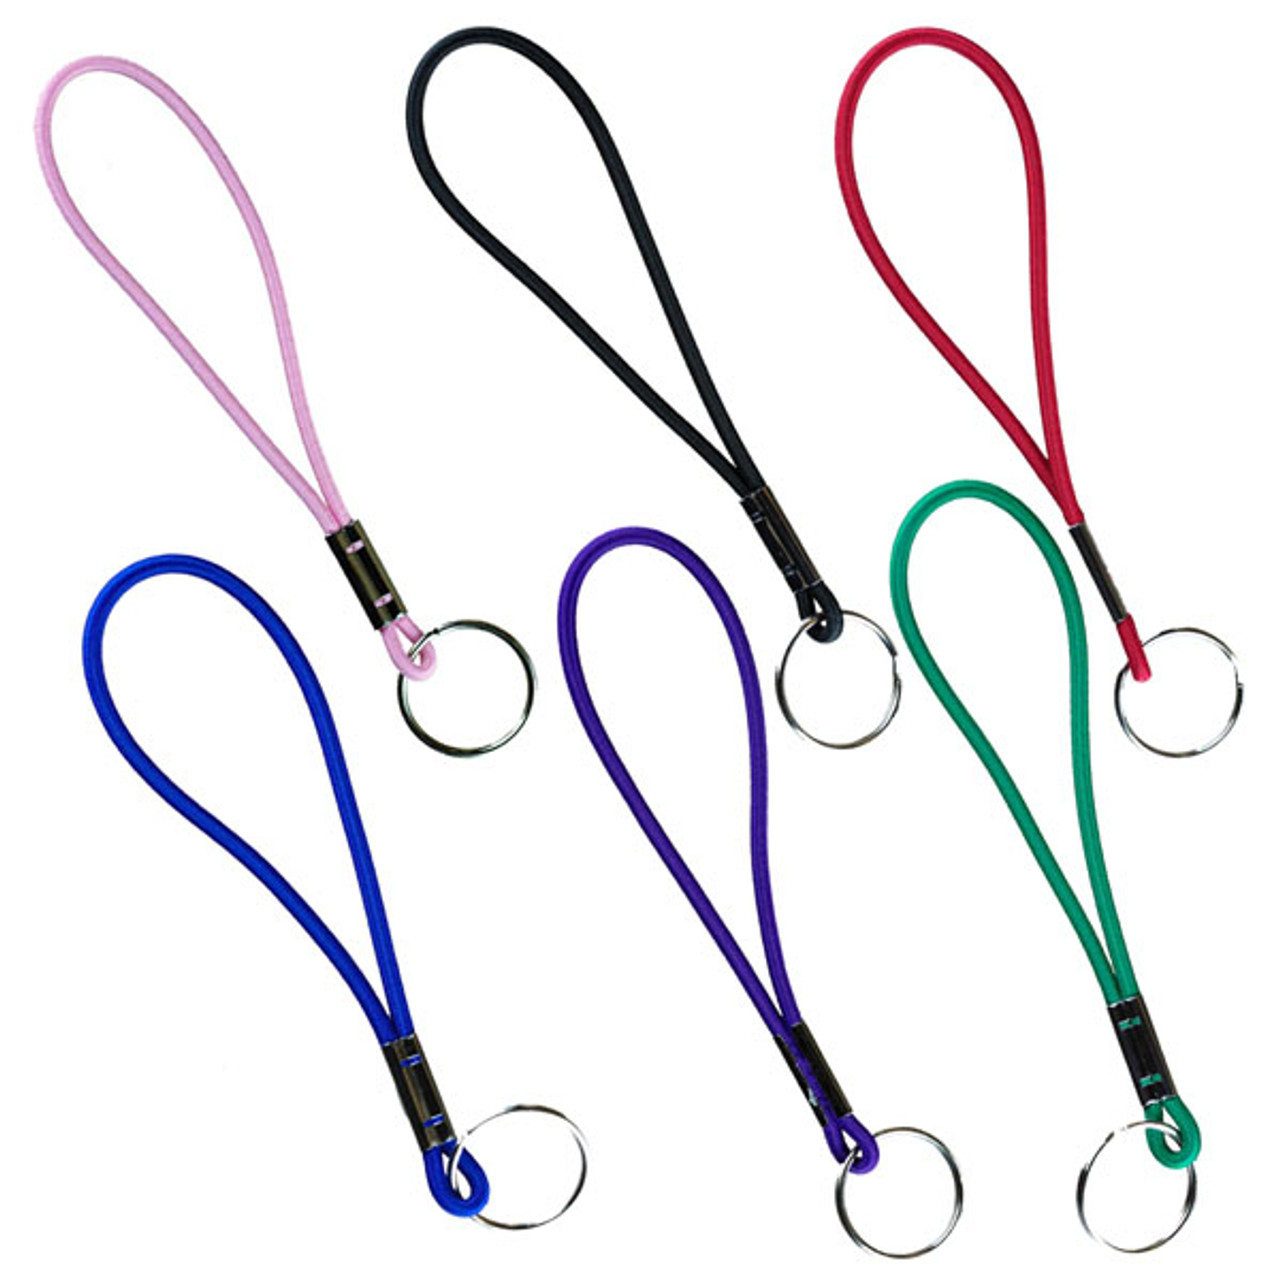 Shop for and Buy Elastic Wrist Key Band Key Chain - Bulk Assorted Colors at  . Large selection and bulk discounts available.